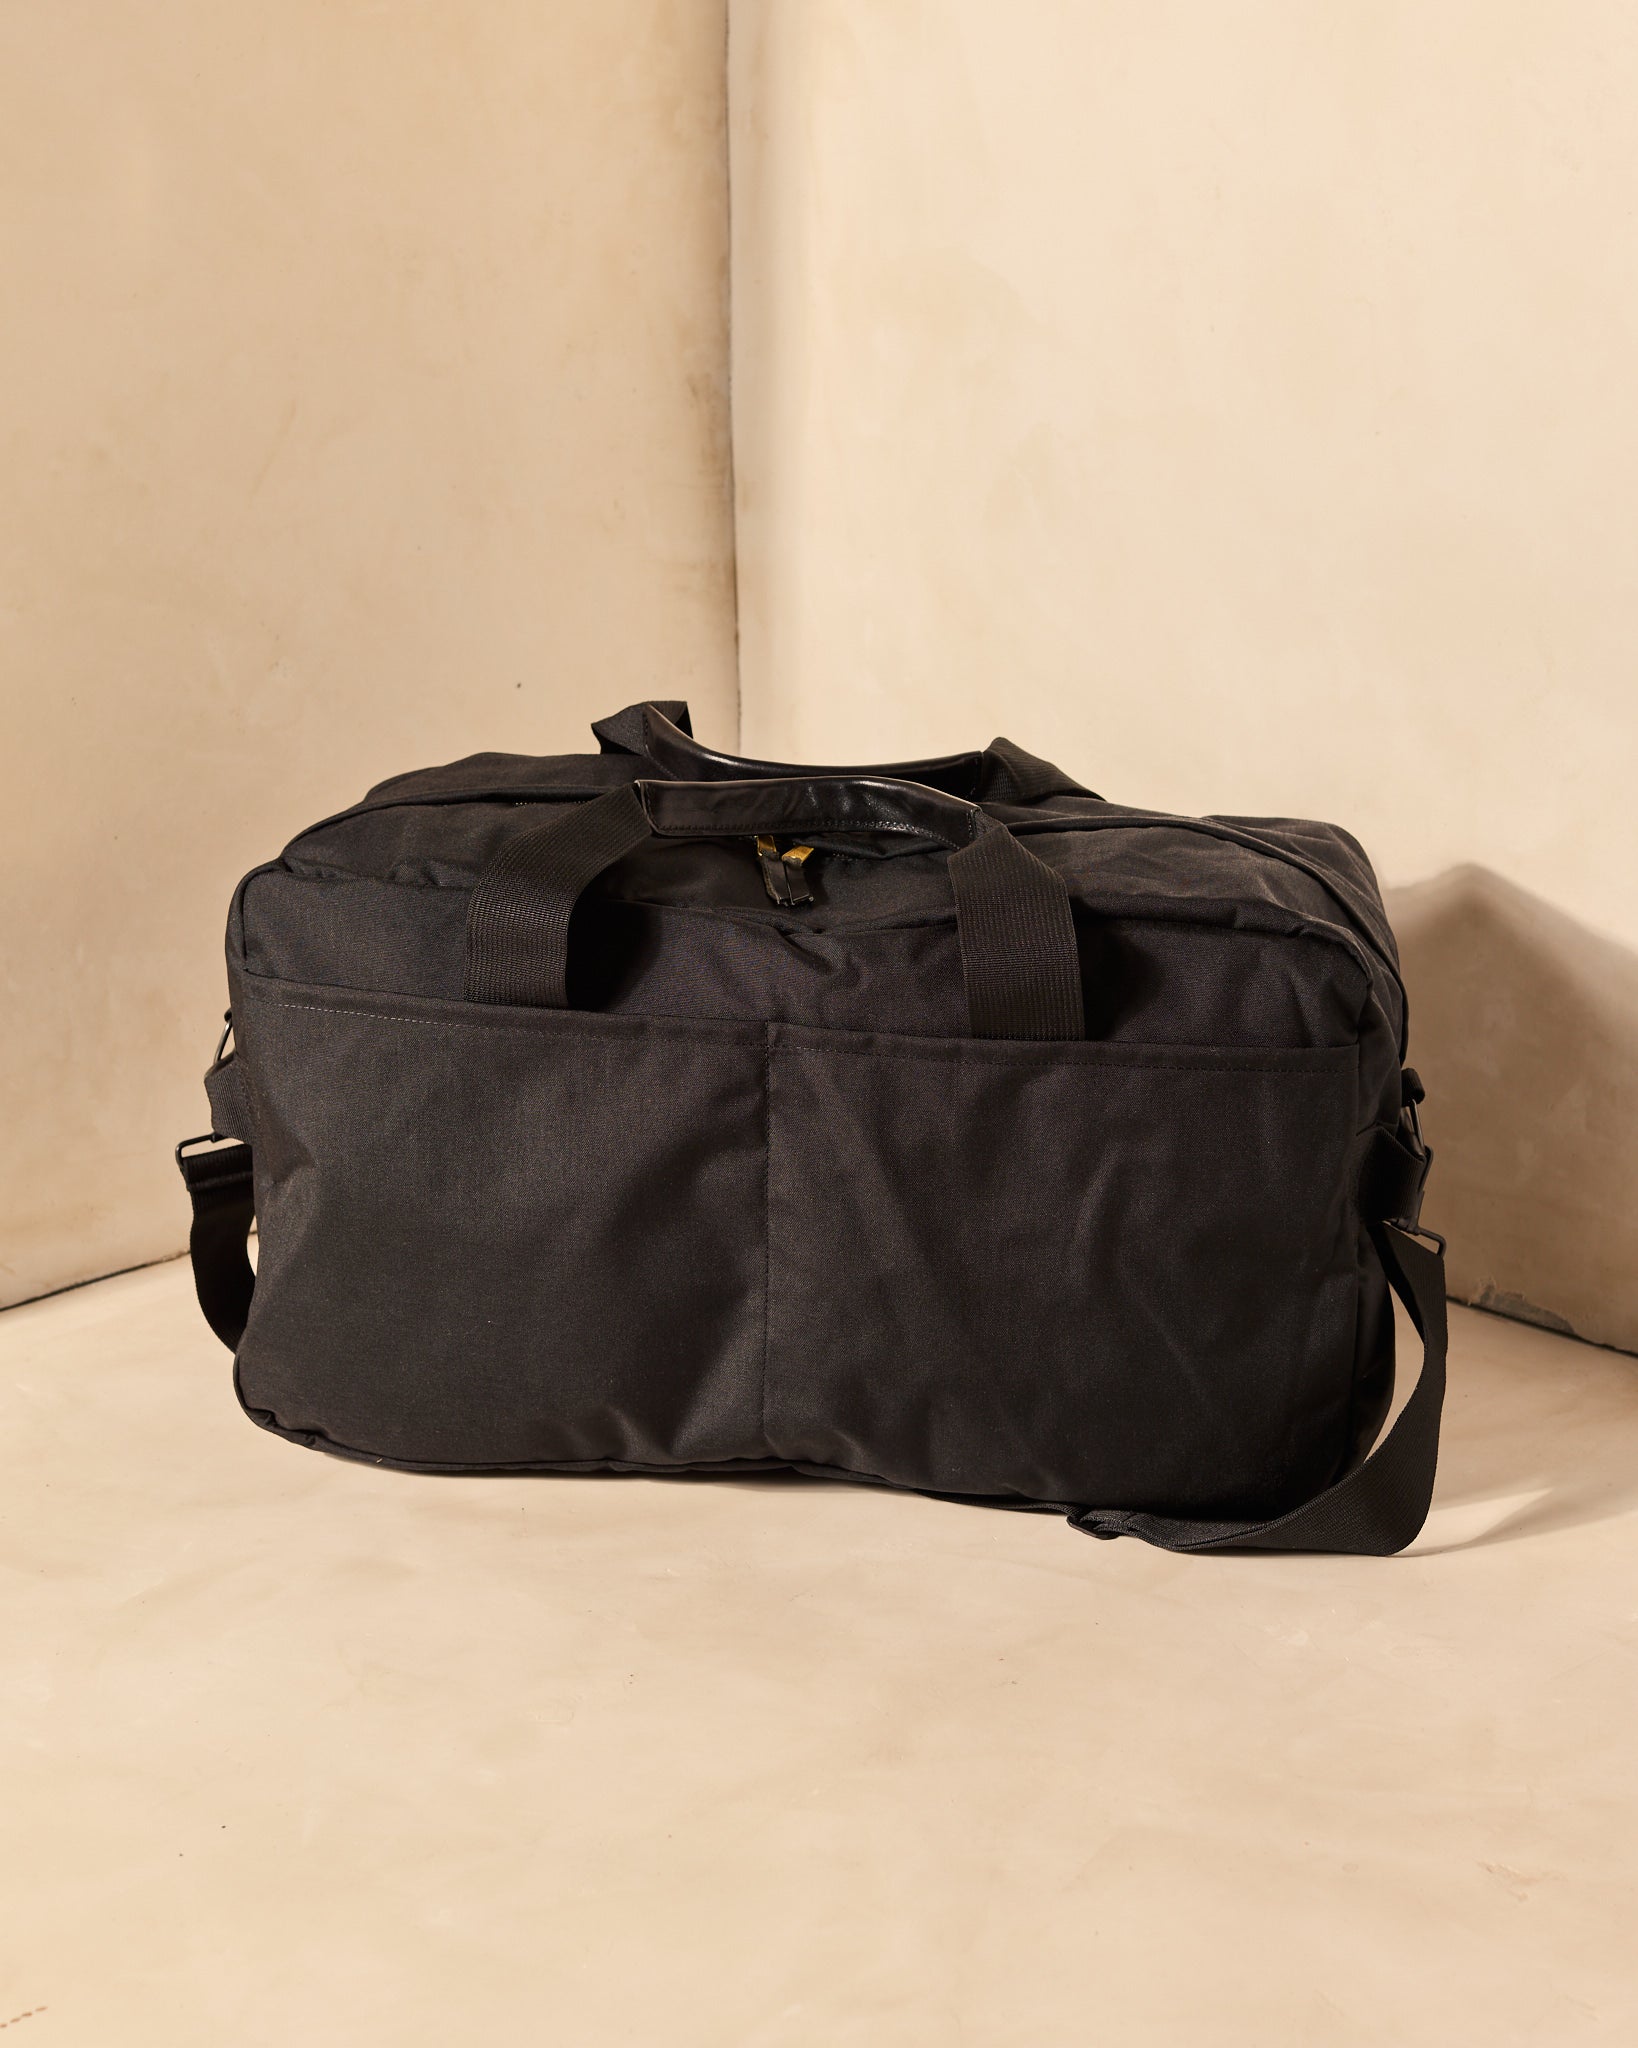 joshjjo's fave Dagne? The Large Lagos Convertible Duffle. “It is